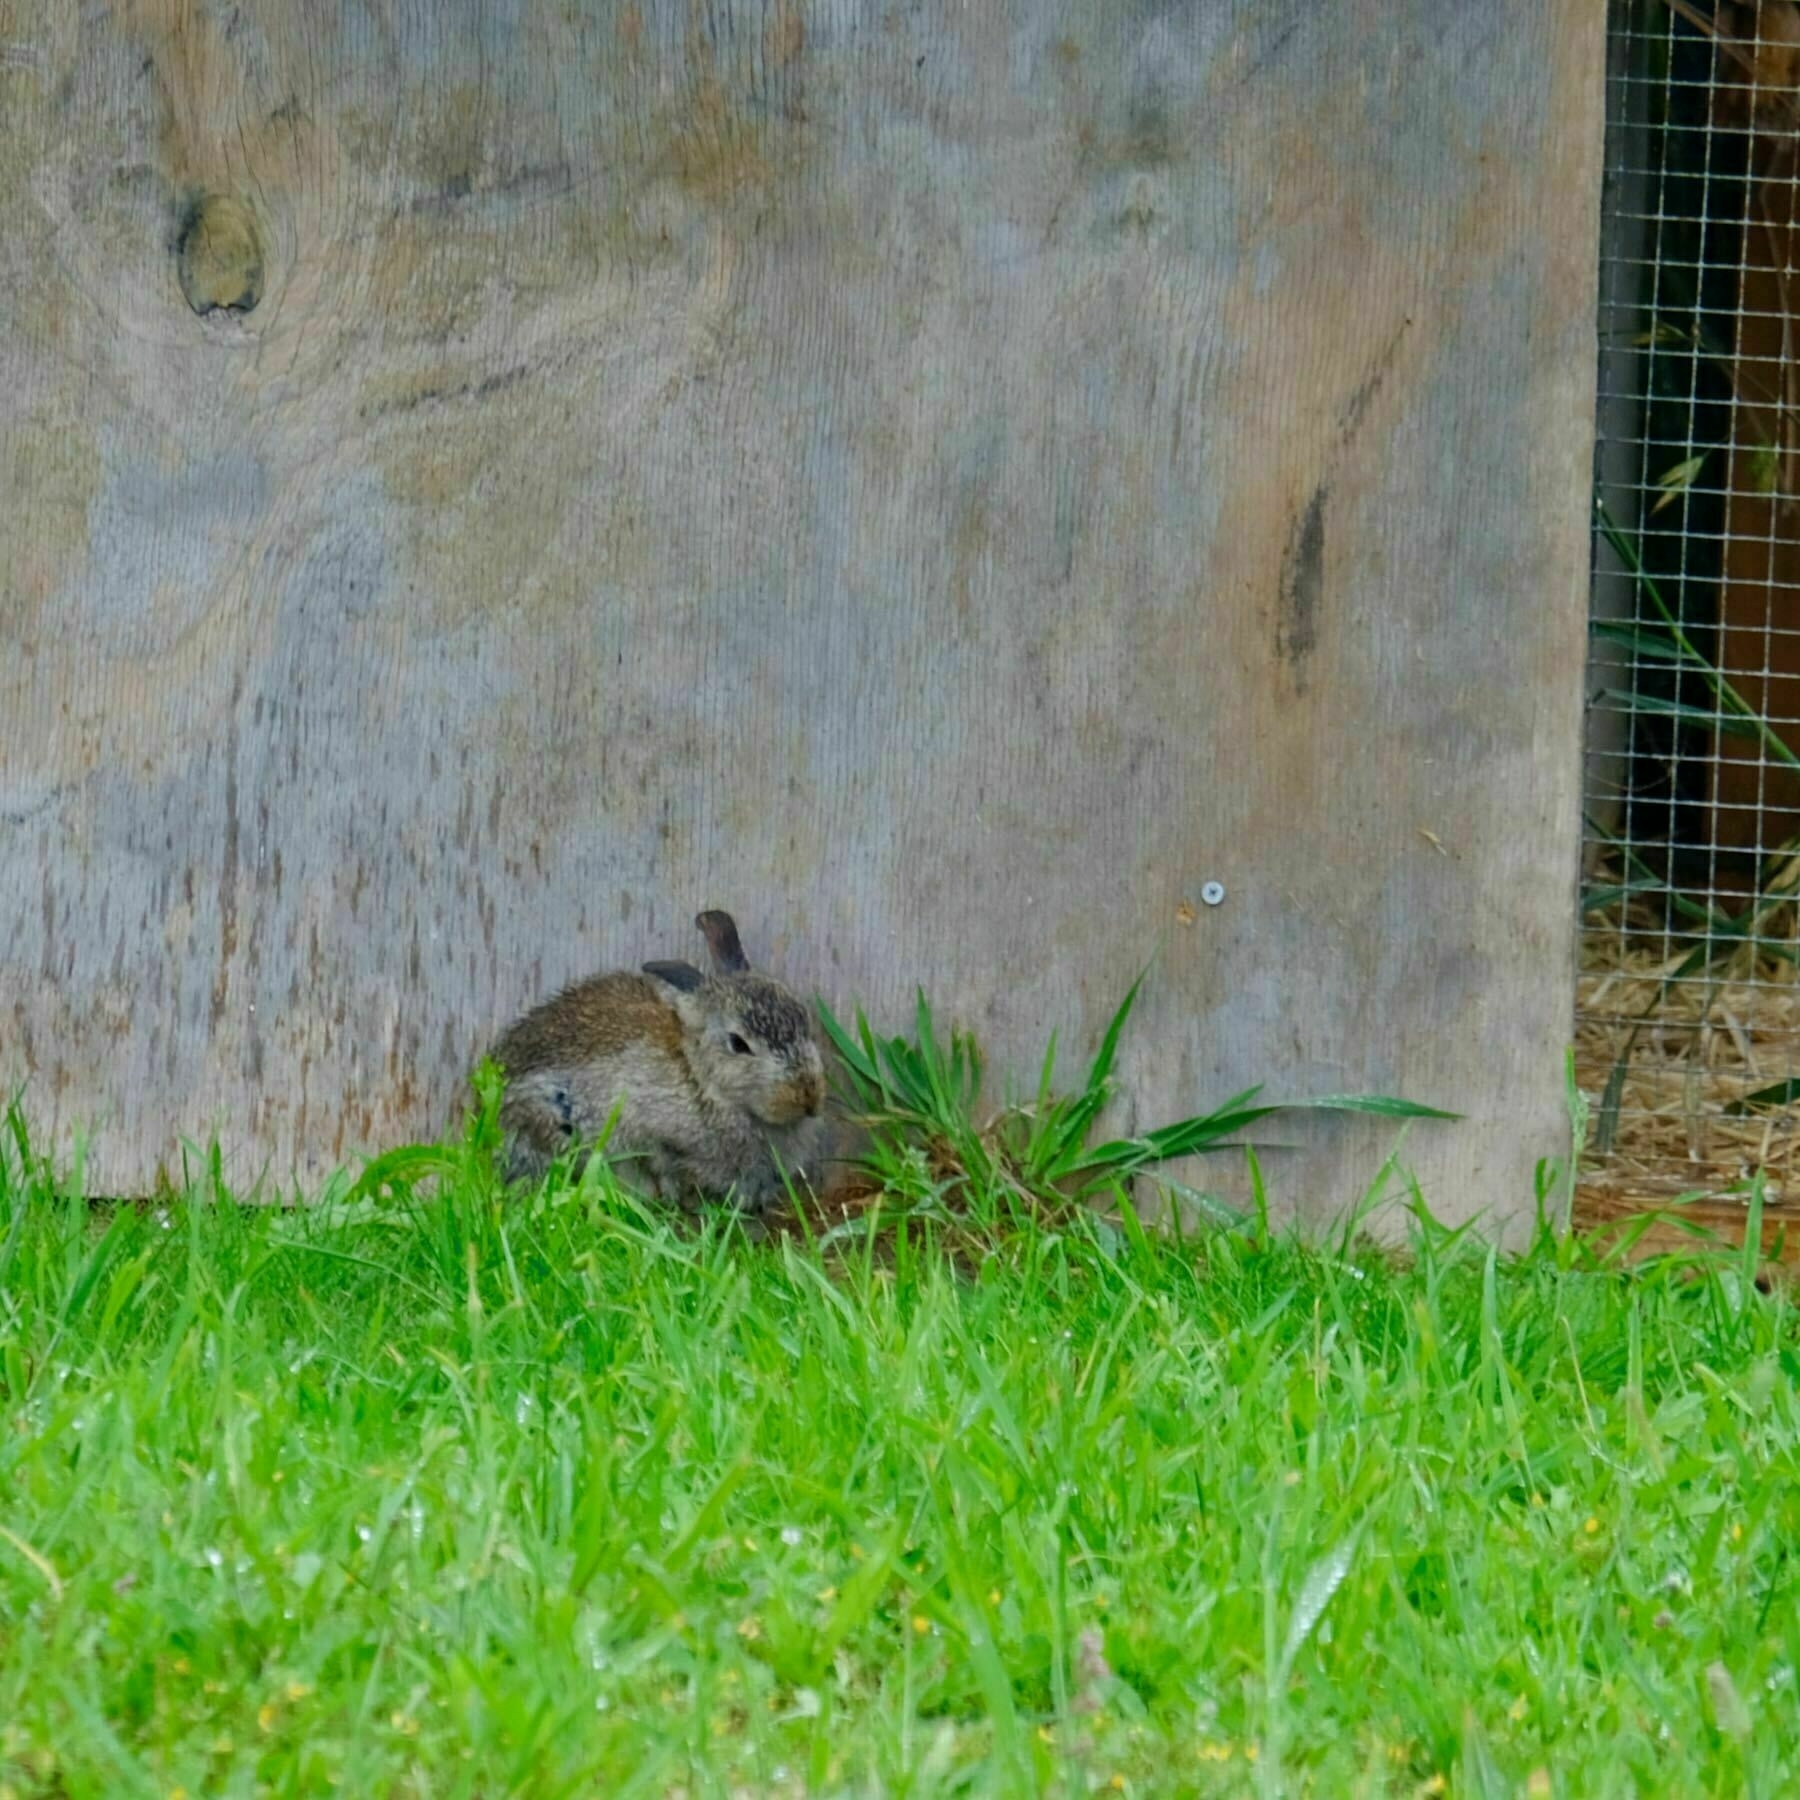 Small rabbit by a piece of plywood and green grass. 